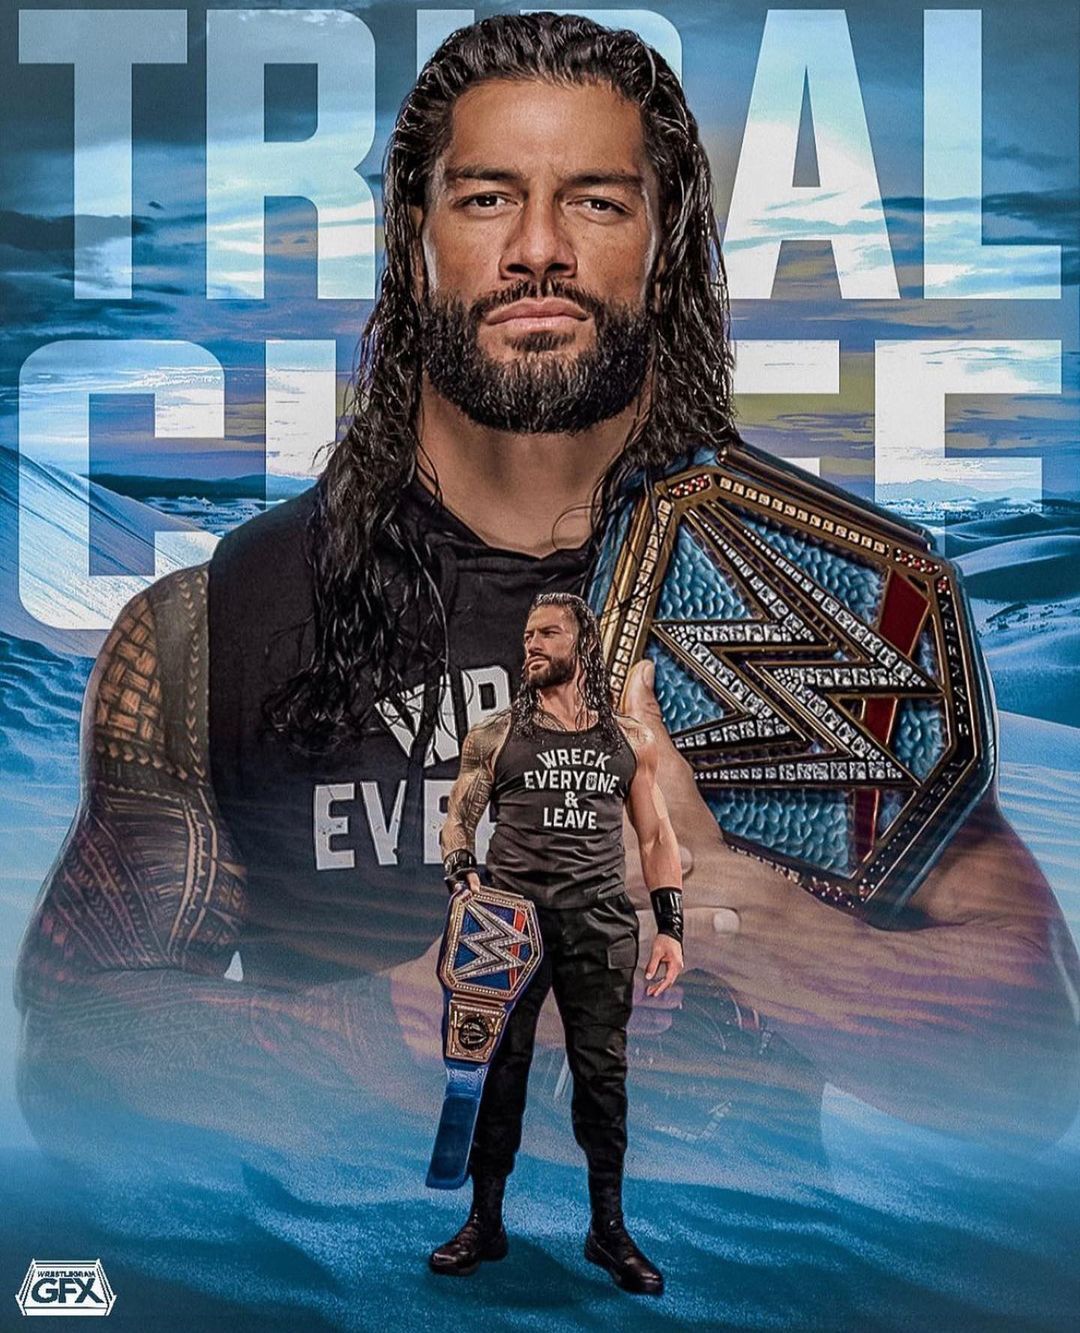 Niko Exxtra shared a post on Instagram: “All hail the Tribal Chief! # romanreigns #wwe #raw #smackdown #wwefan credit:. Roman reigns, Wwe roman reigns, Roman